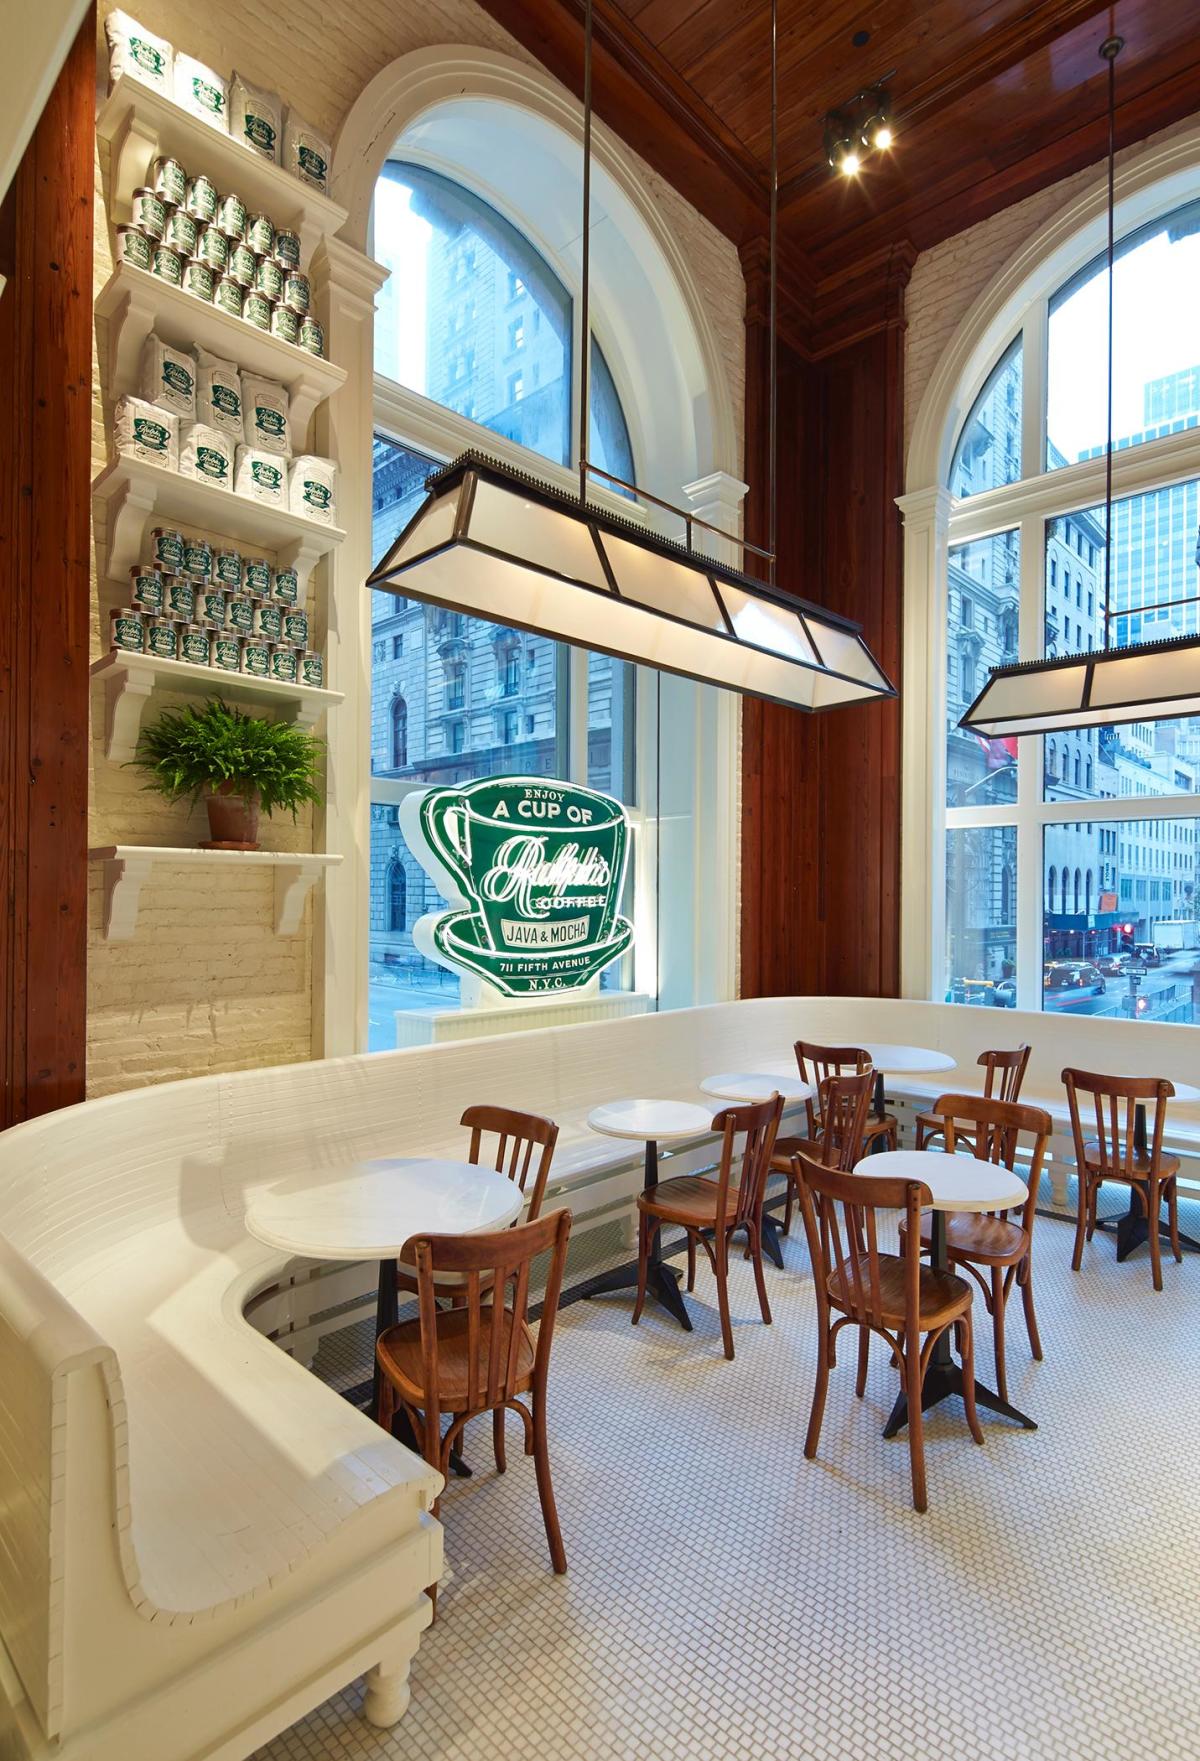 Ralph Lauren just opened its first Miami coffee shop, and it's chic